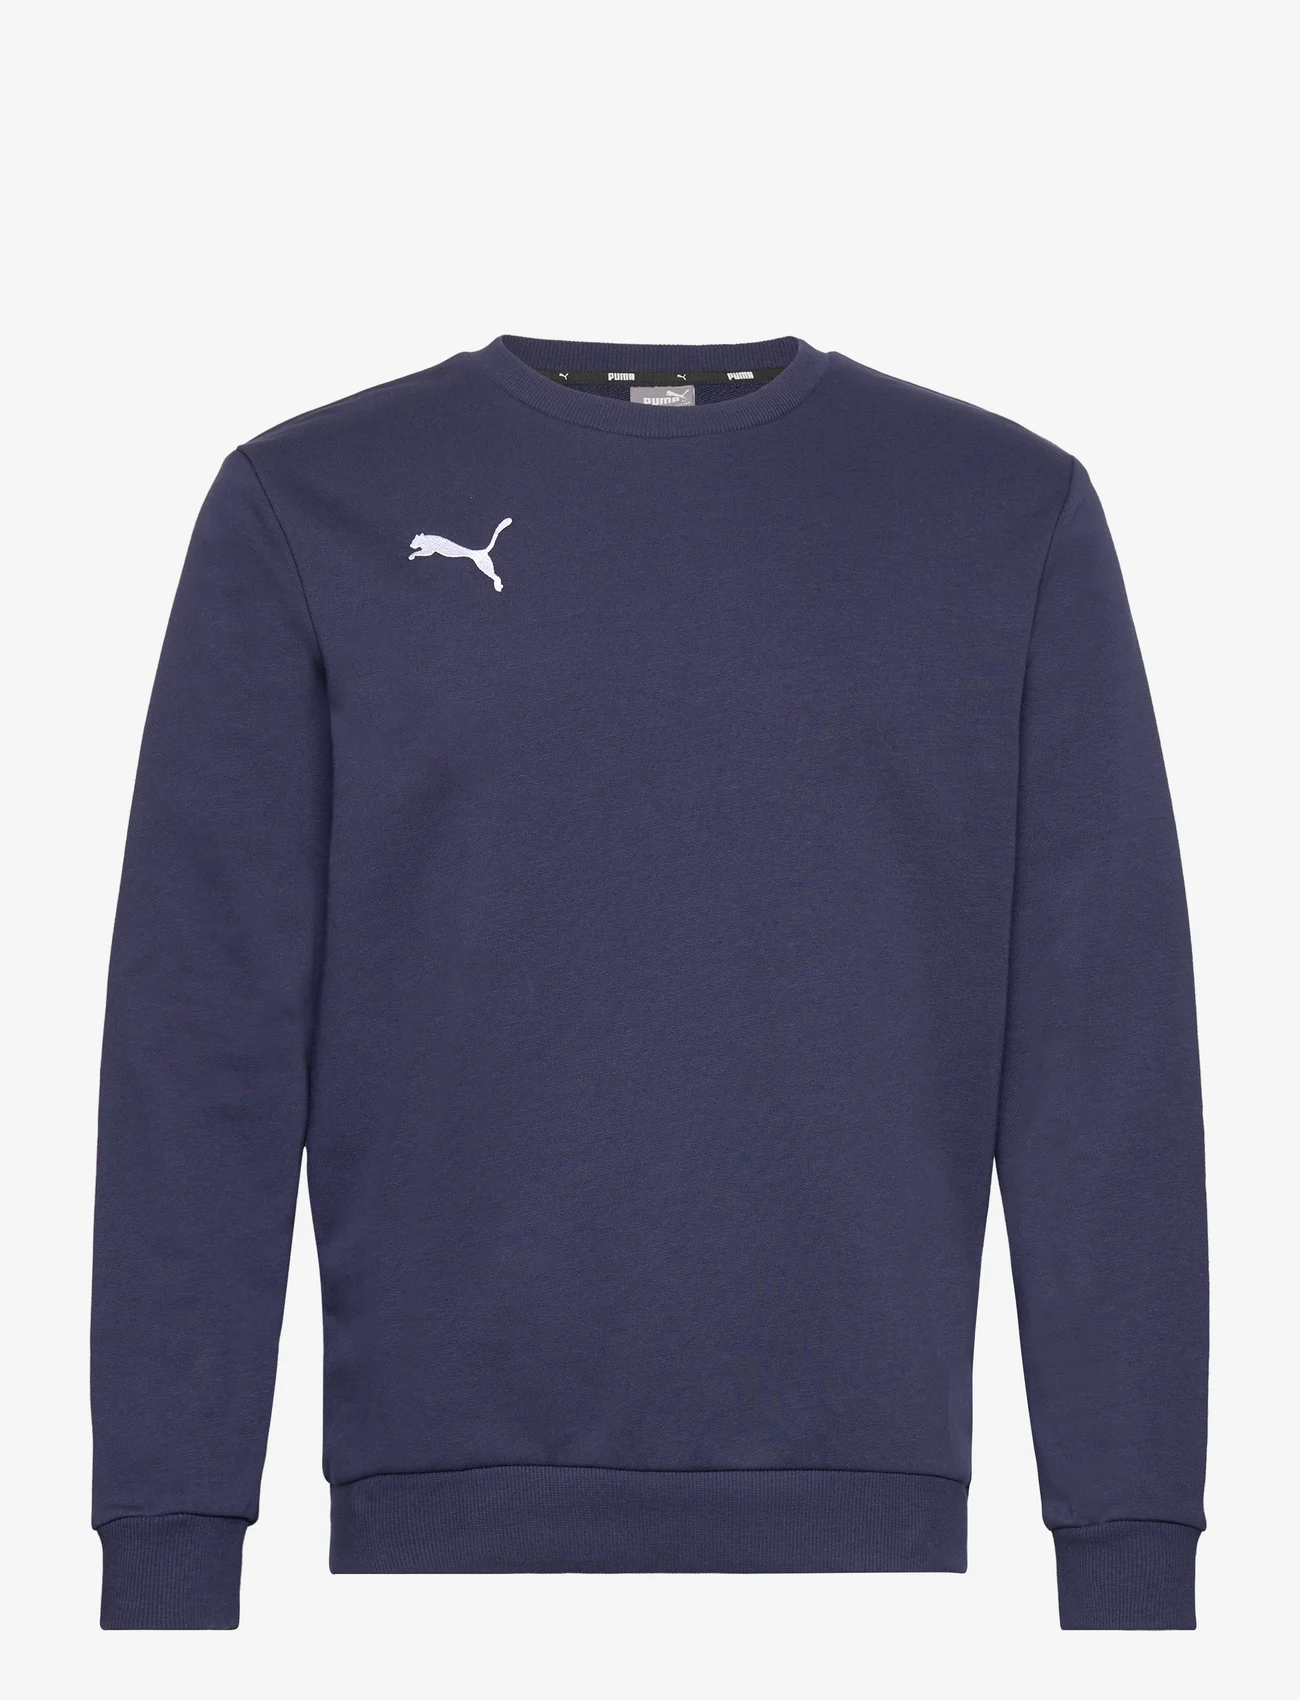 PUMA - teamGOAL 23 Casuals Crew Neck Sweat - lowest prices - peacoat - 0